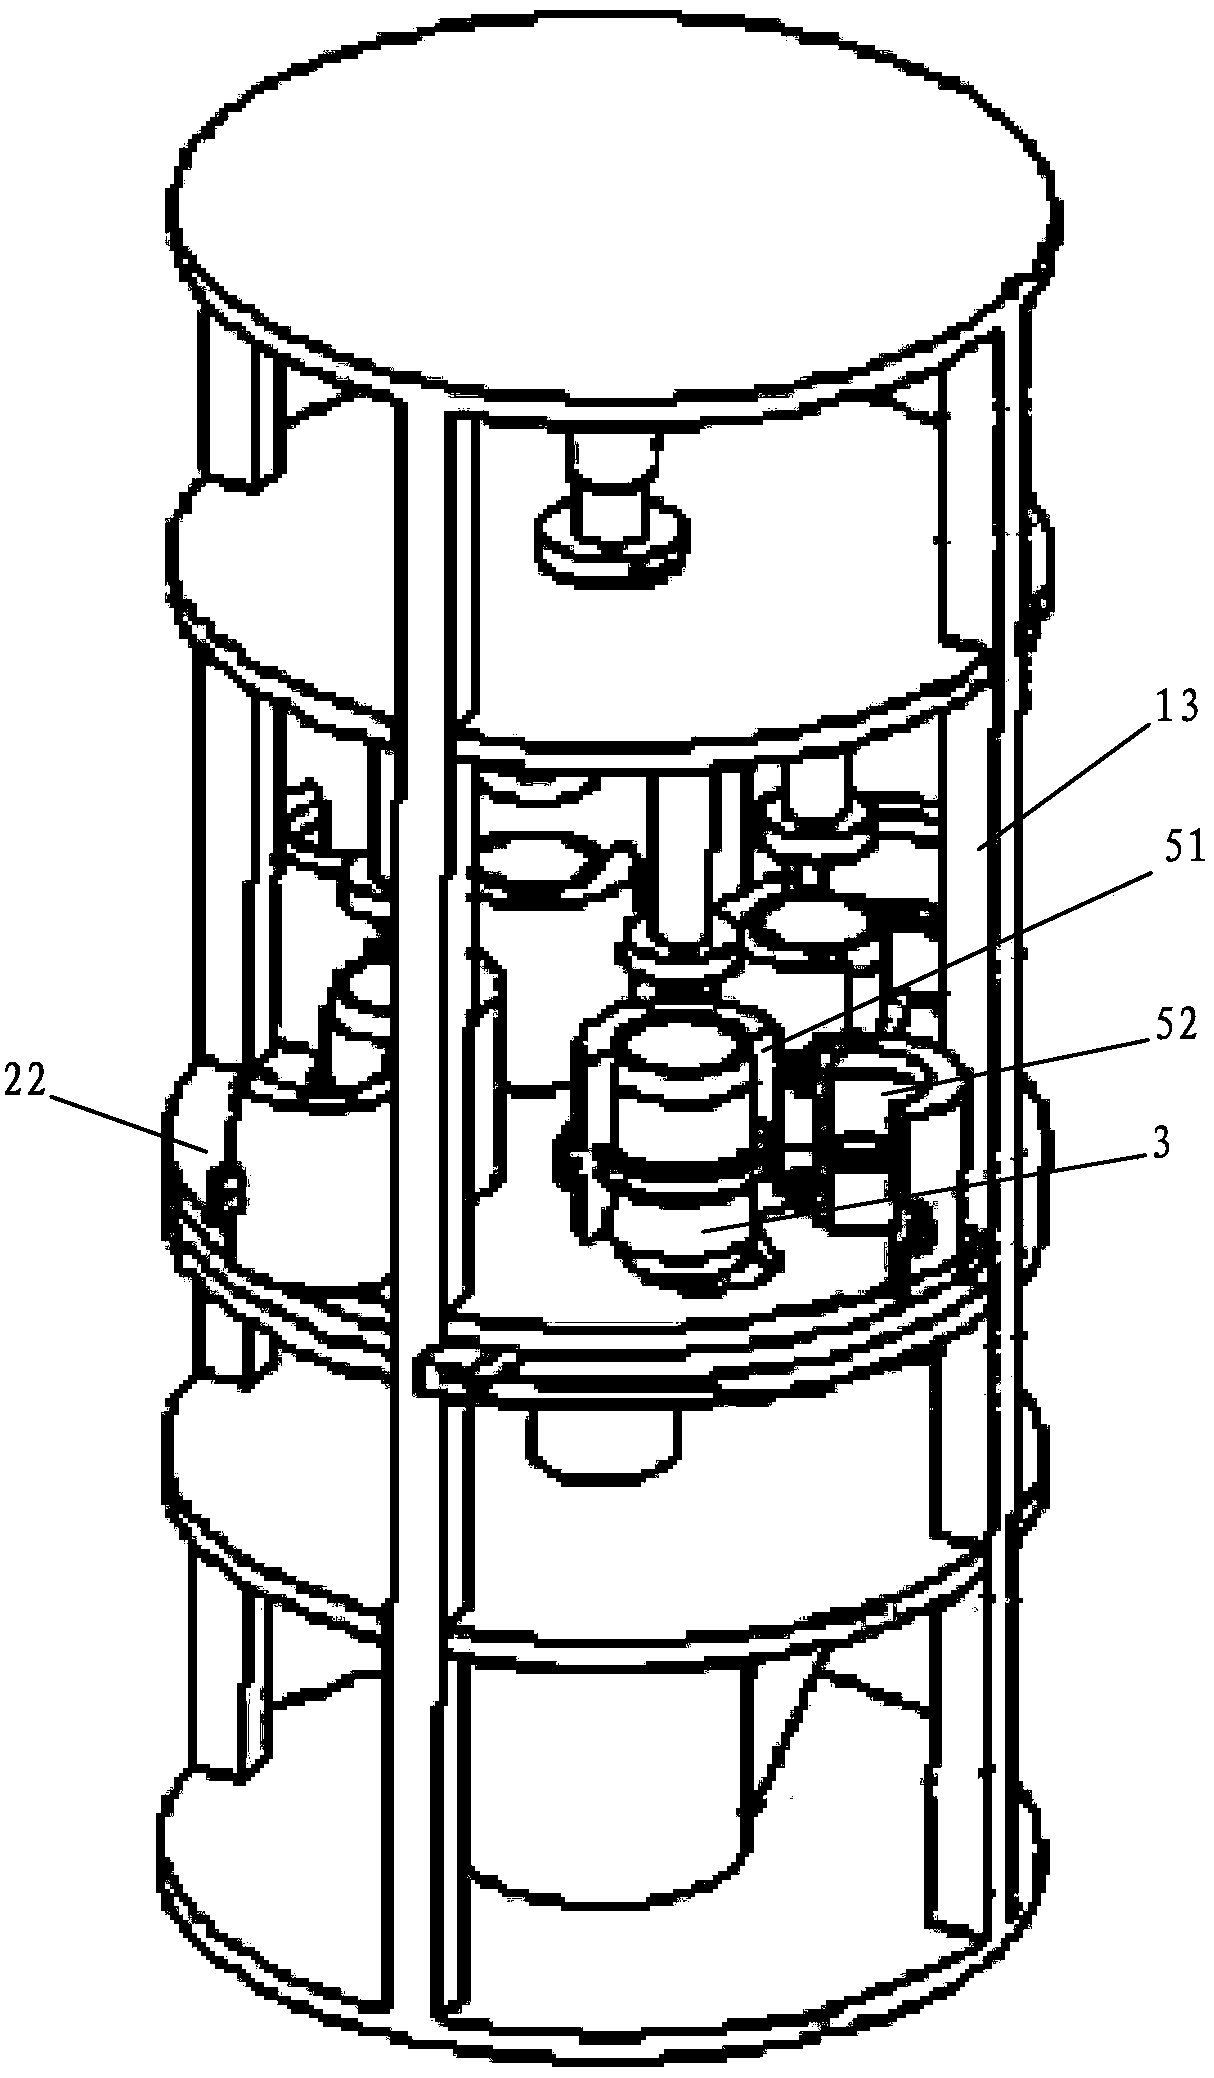 A soil sample mold making and demoulding device